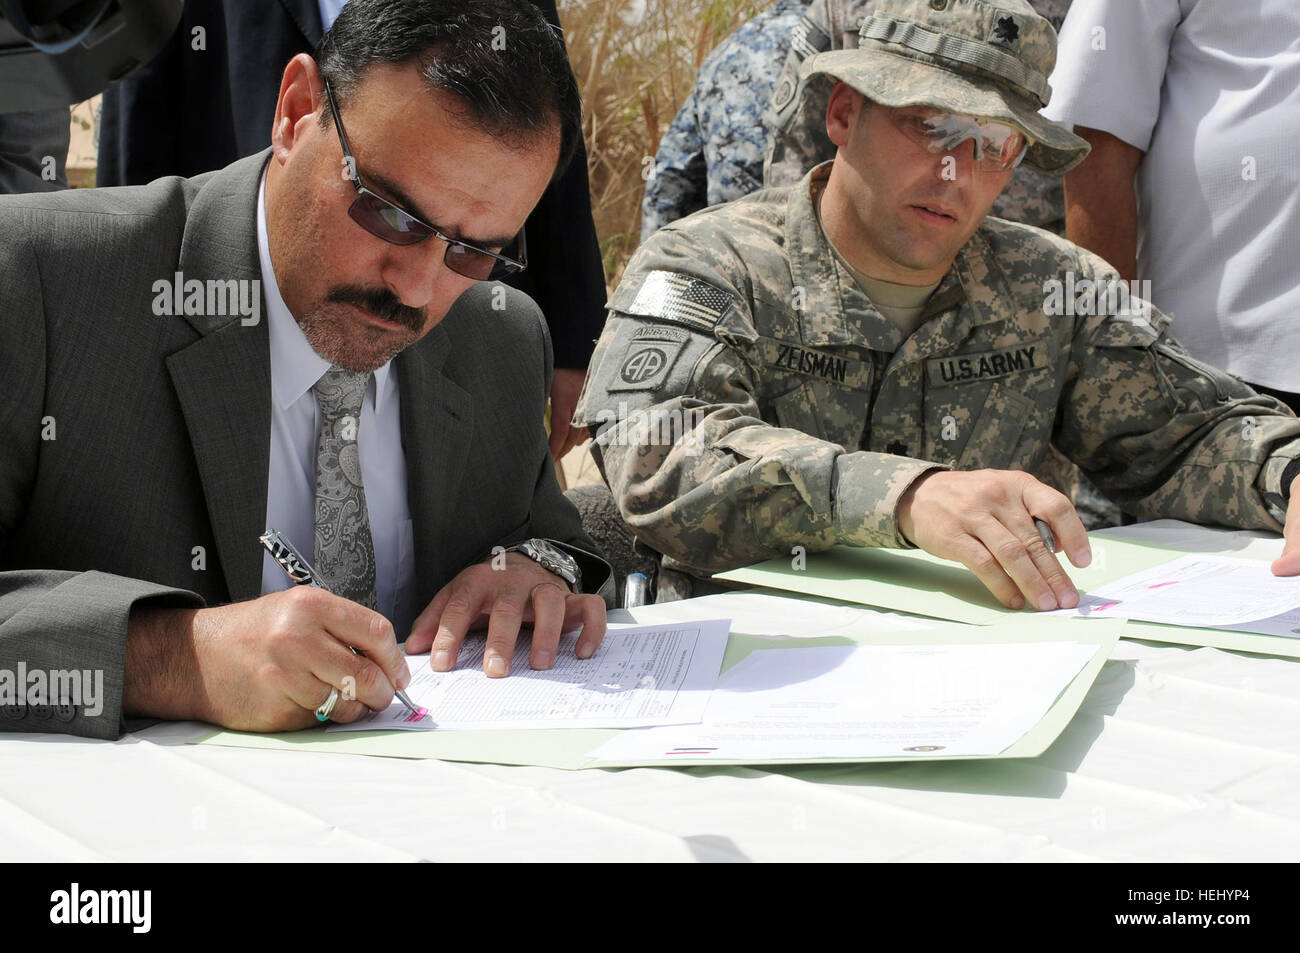 A representative of the Iraqi Ministry of the Interior, and U.S. Army Lt. Col. Louis Zeisman from Fayetteville, N.C., commander of 2nd Battalion, 505th Parachute Infantry Regiment, 3rd Brigade Combat Team, 82nd Airborne Division, prepare to sign paperwork officially transferring control of Joint Security Station Oubaidy in eastern Baghdad, Iraq, on June 20. Control of the joint security station is being transferred from the U.S. Army, 2nd Battalion, 505th Infantry Regiment, 3rd Brigade Combat Team, 82nd Airborne Division to the Iraqi national police. Transfer of authority ceremony for Joint Se Stock Photo